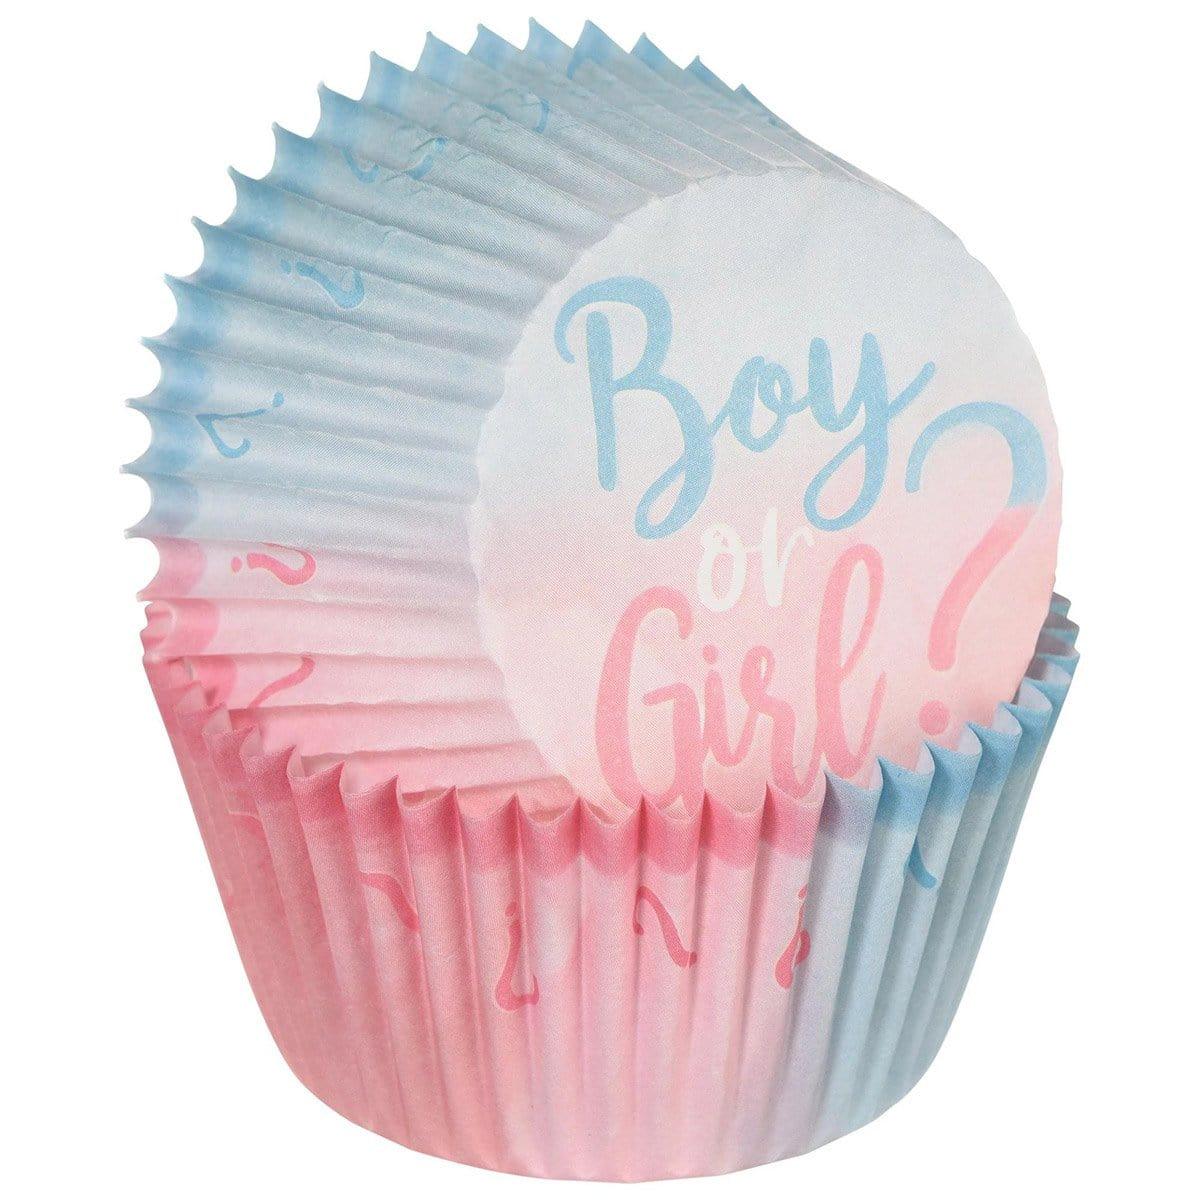 Buy Baby Shower Gender Reveal Party: Cupcakes Cases, 75 Count. sold at Party Expert